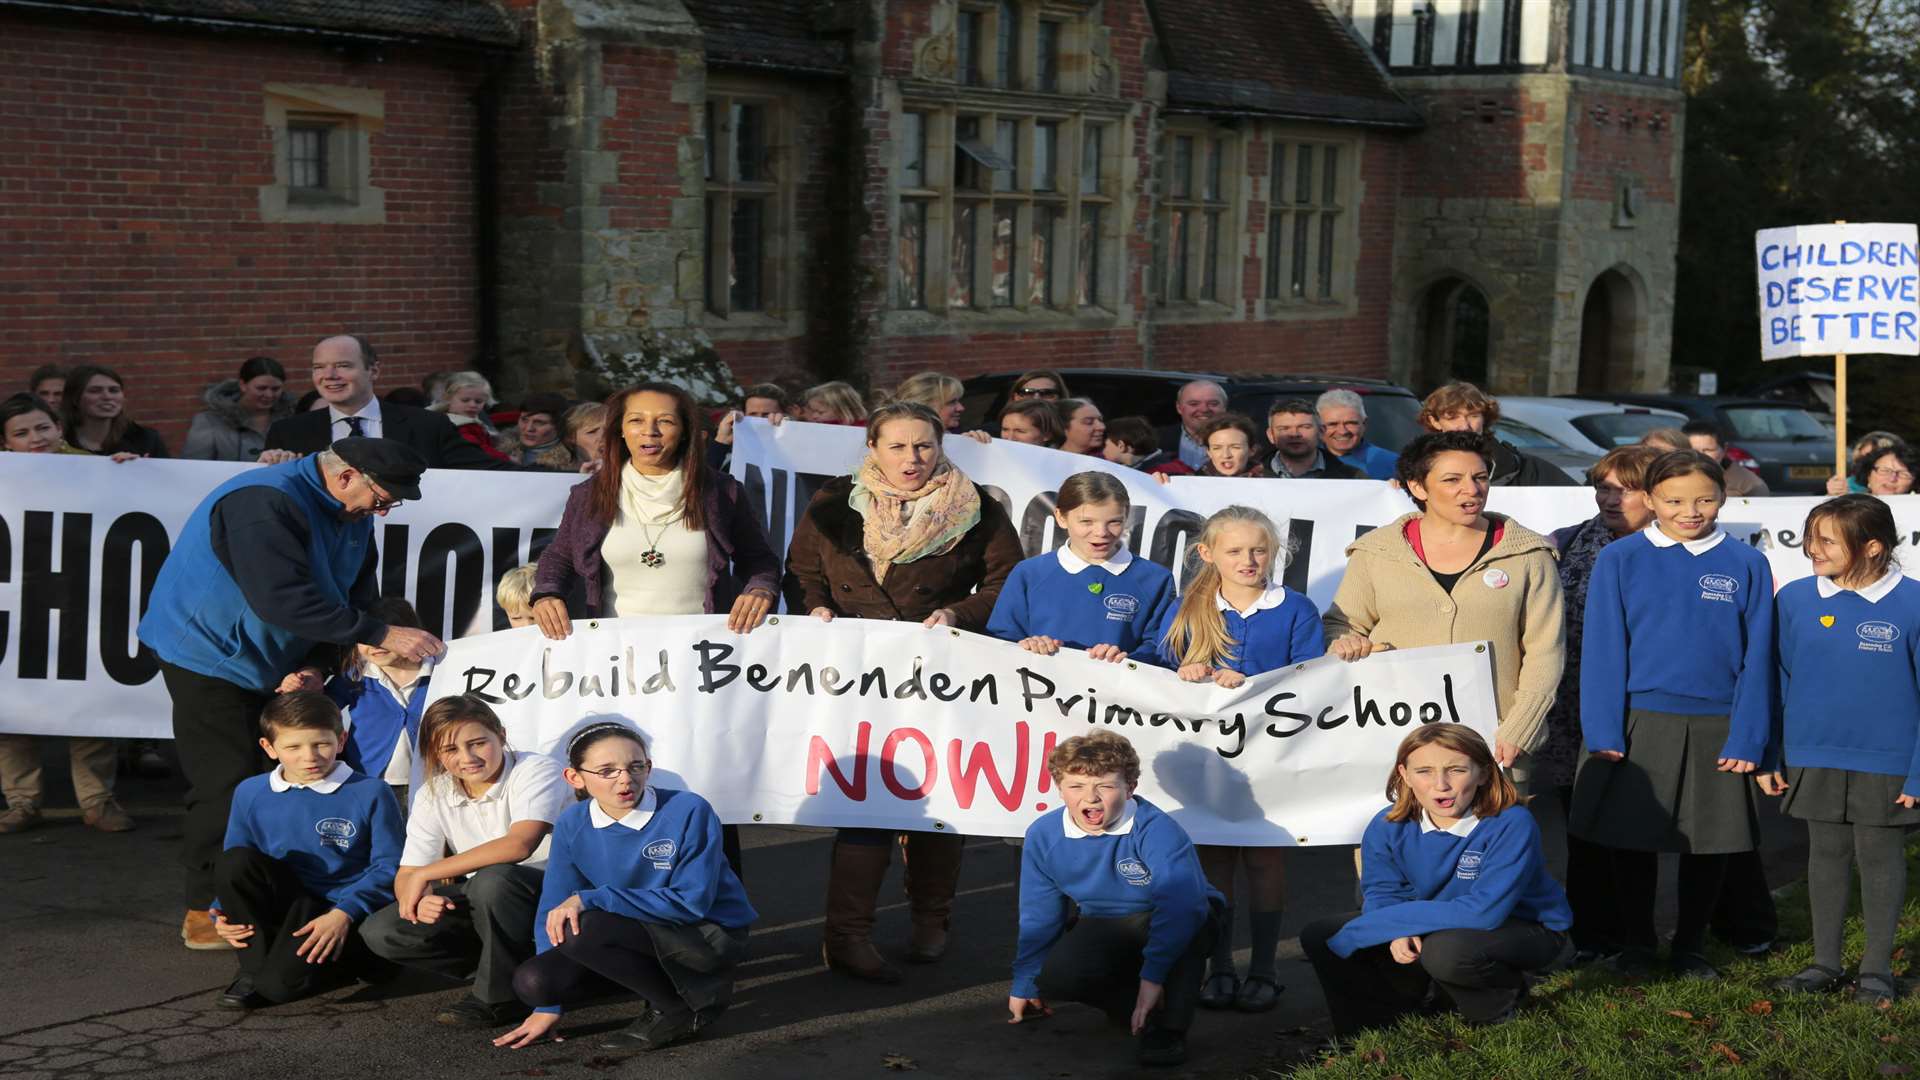 Schoolchildren campaign for a new building for their school in Benenden